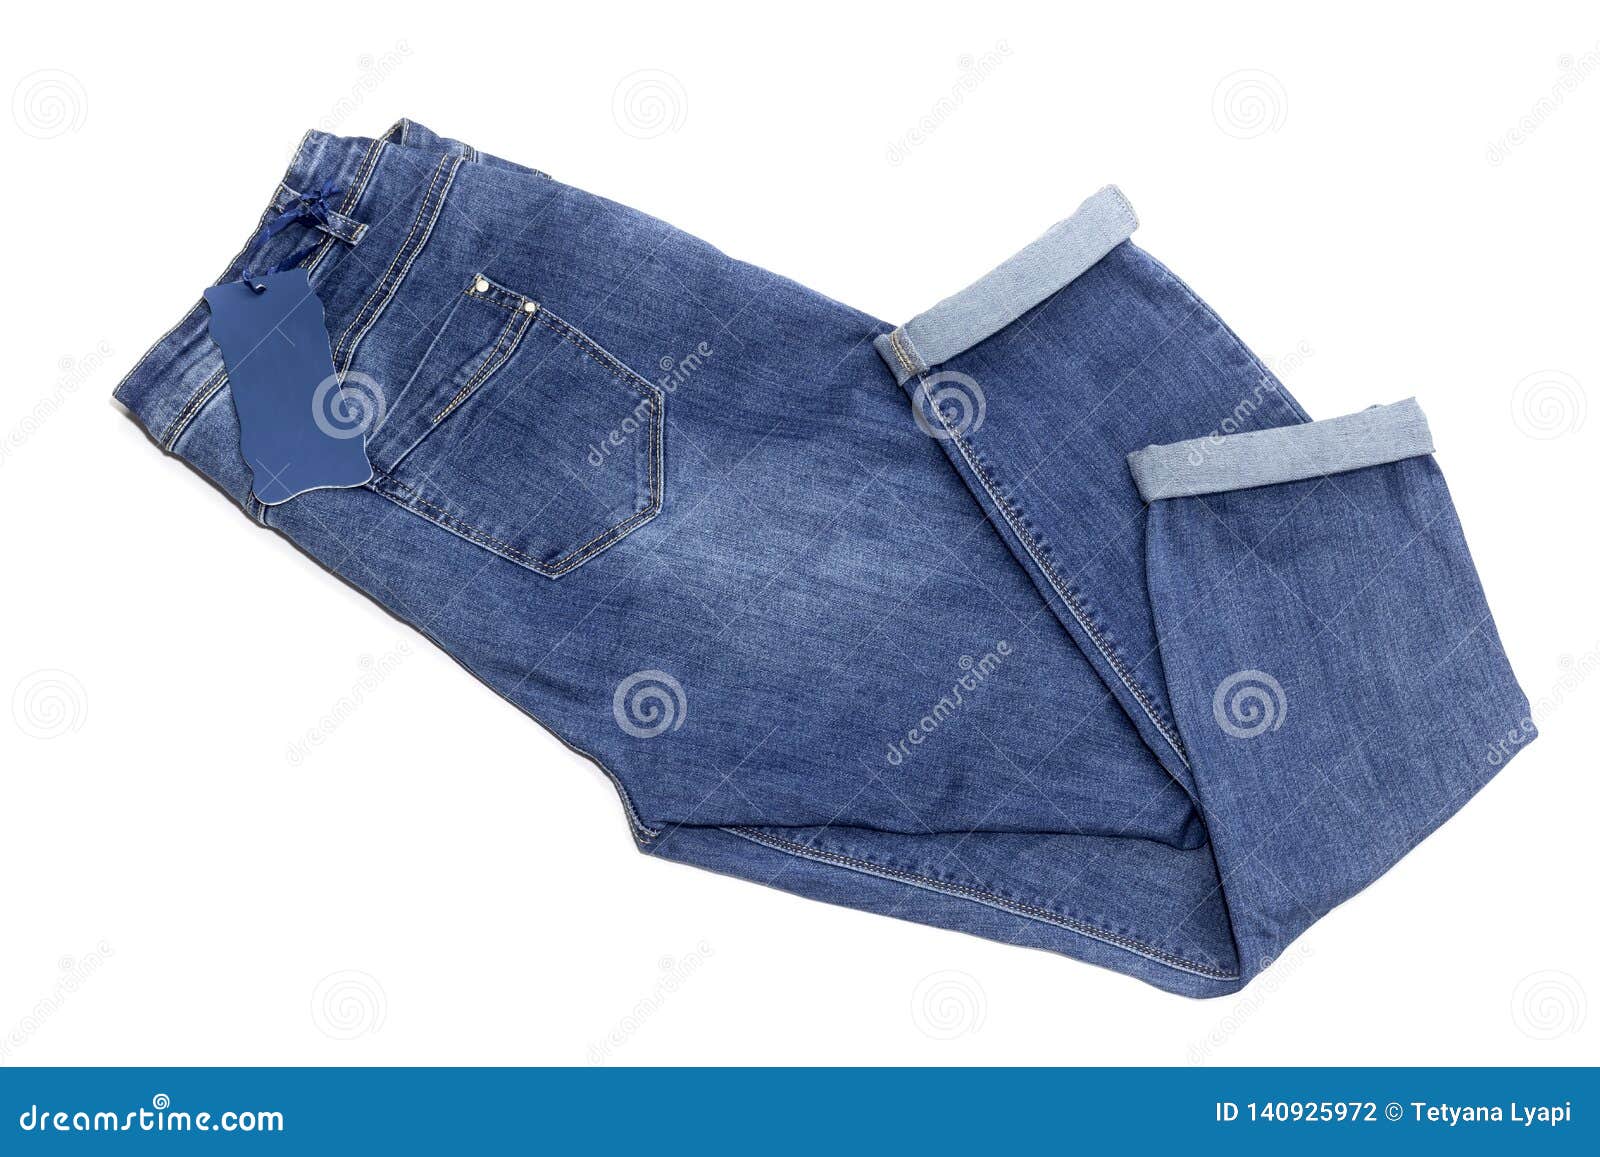 The women, jeans close-up stock photo. Image of pants - 140925972